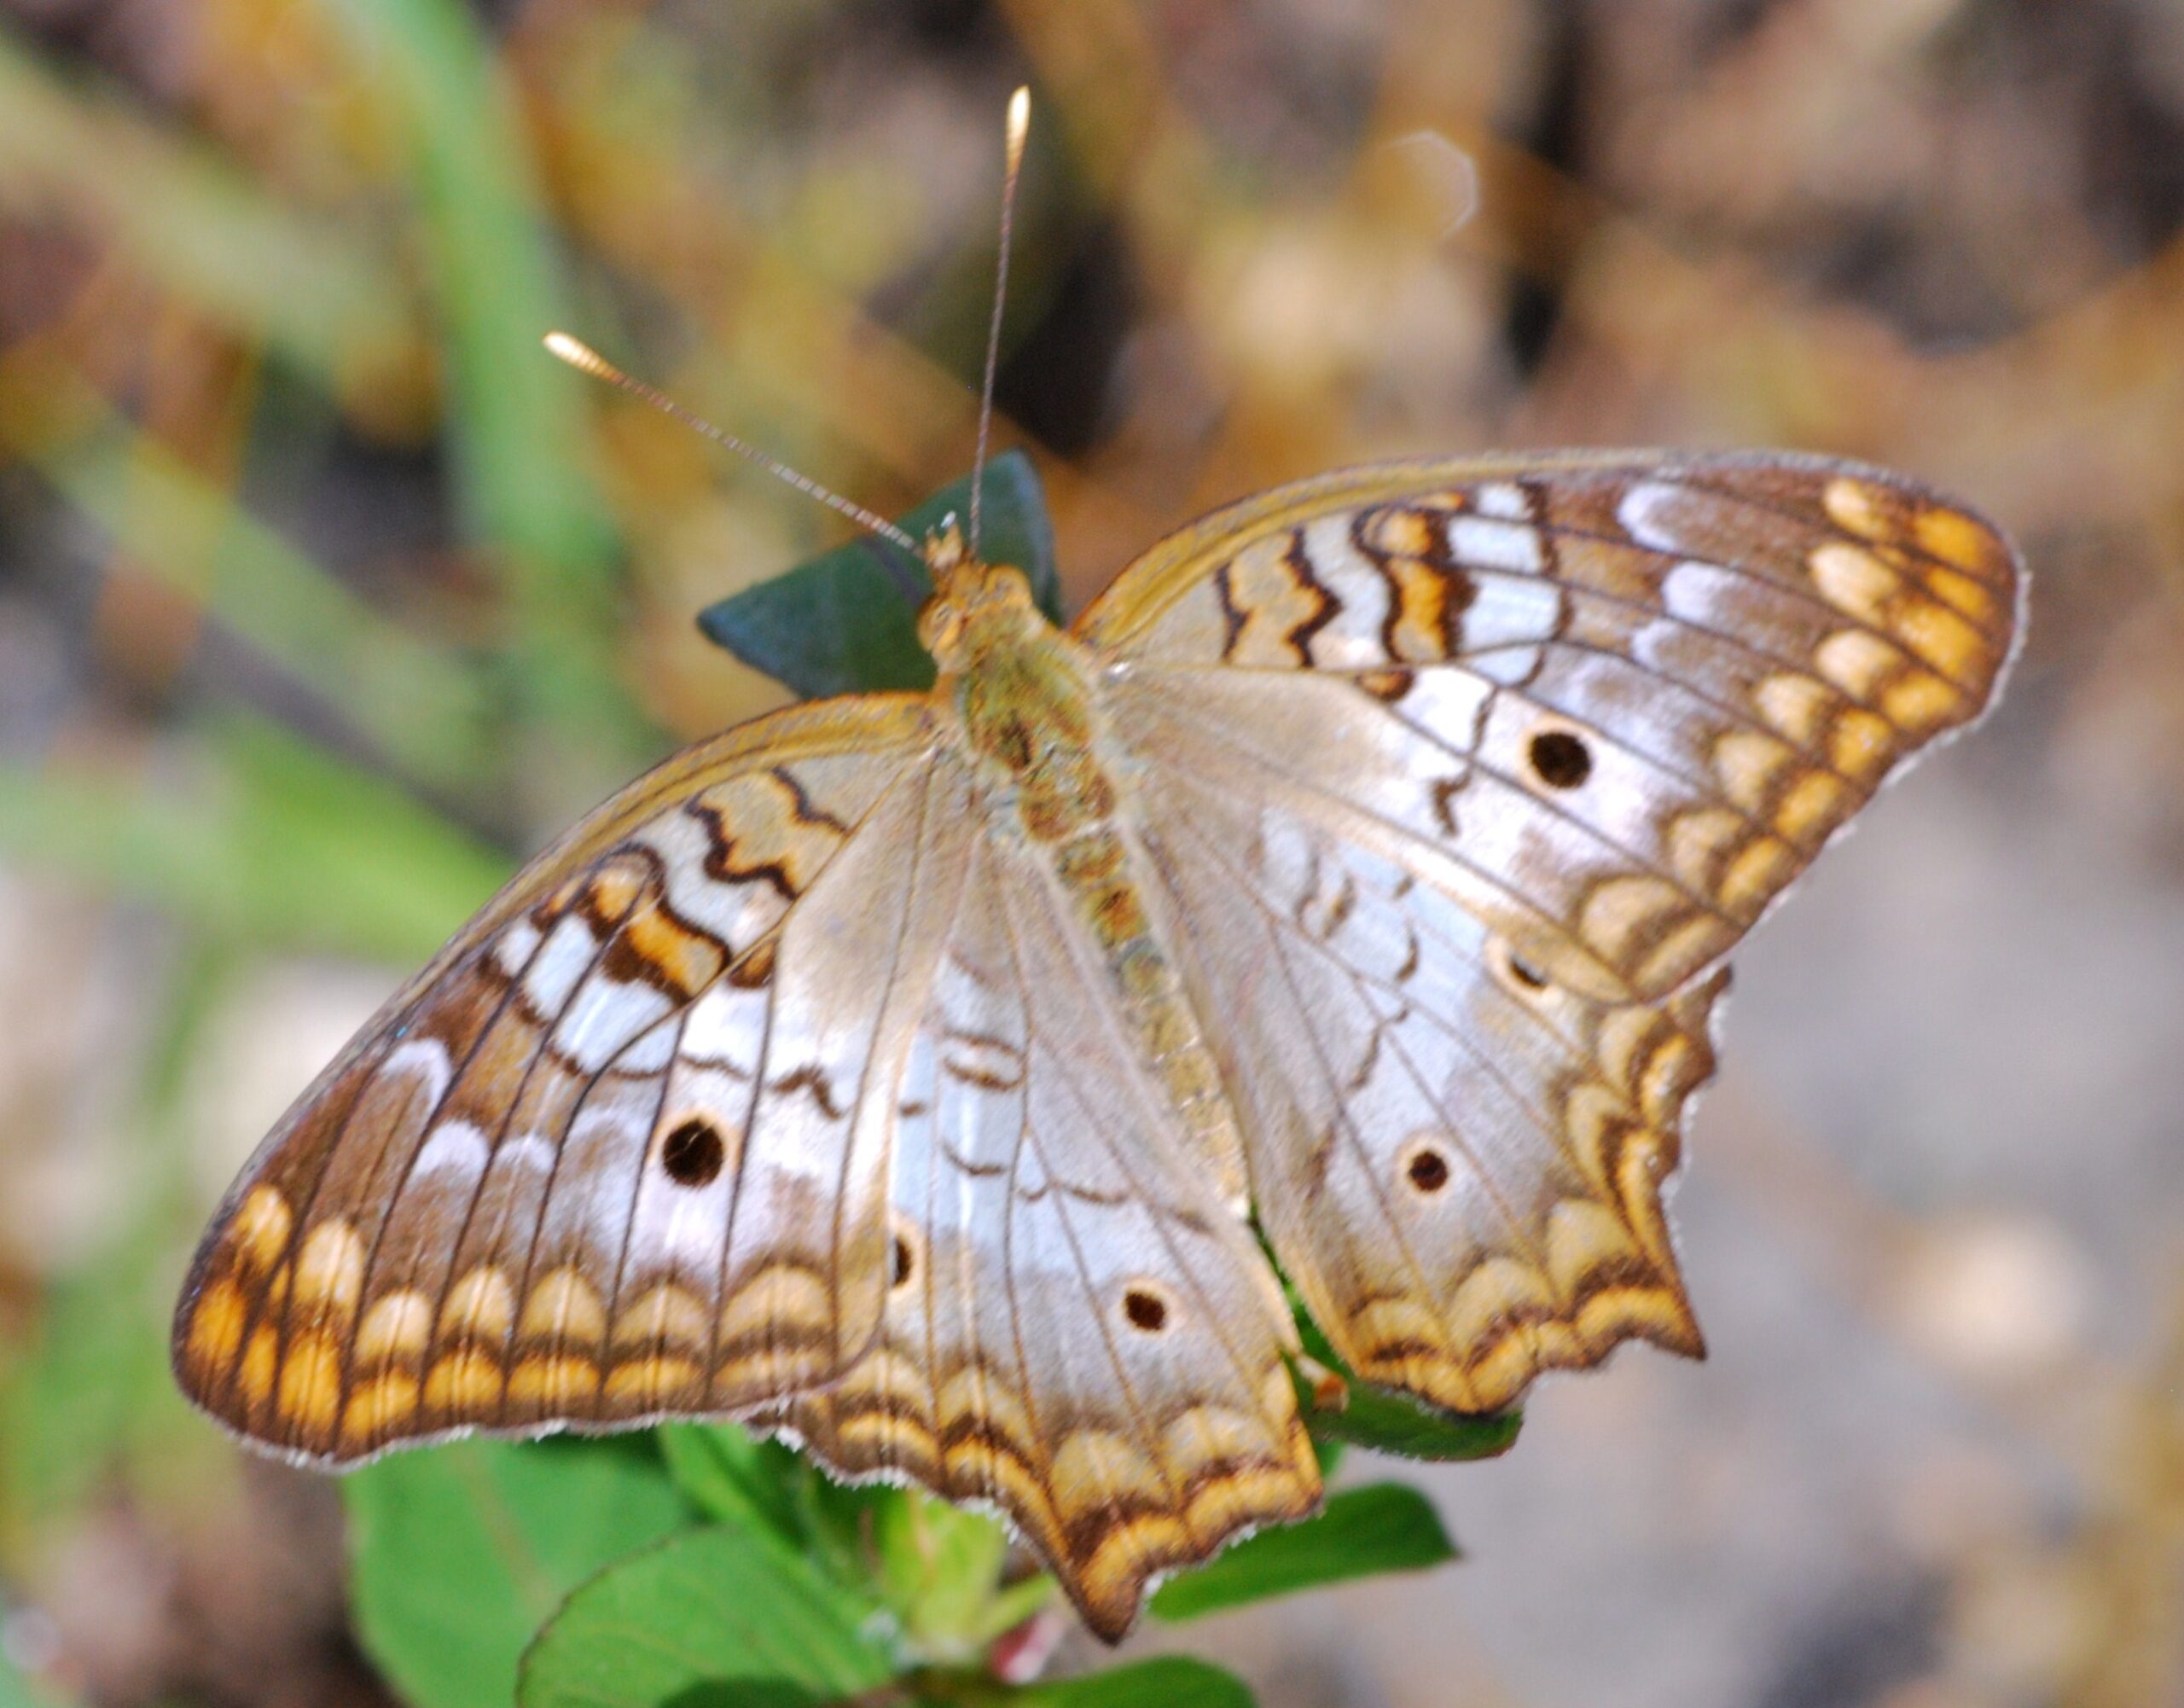 "White Peacock Butterfly in Florida Everglades"